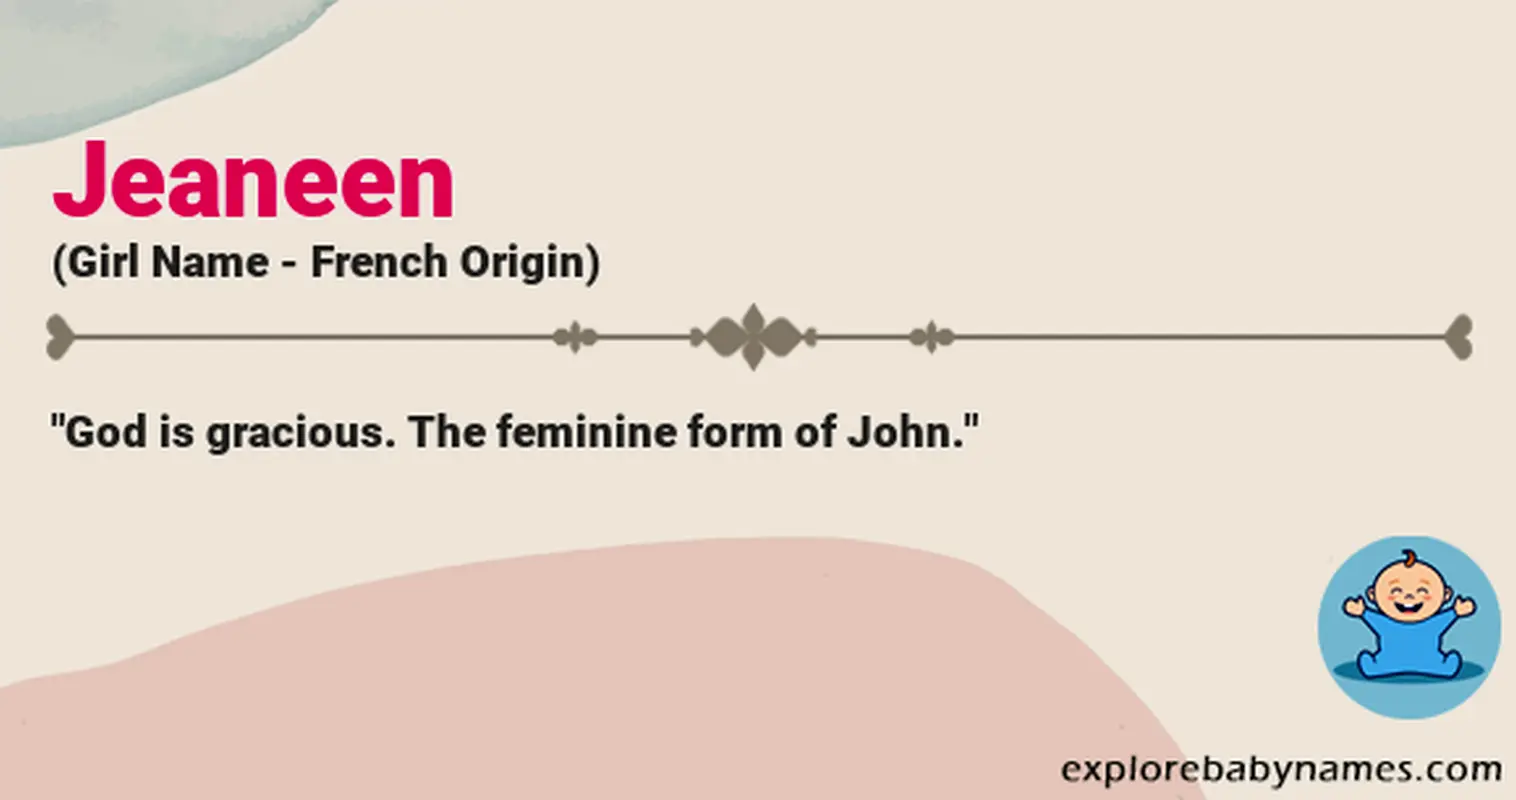 Meaning of Jeaneen